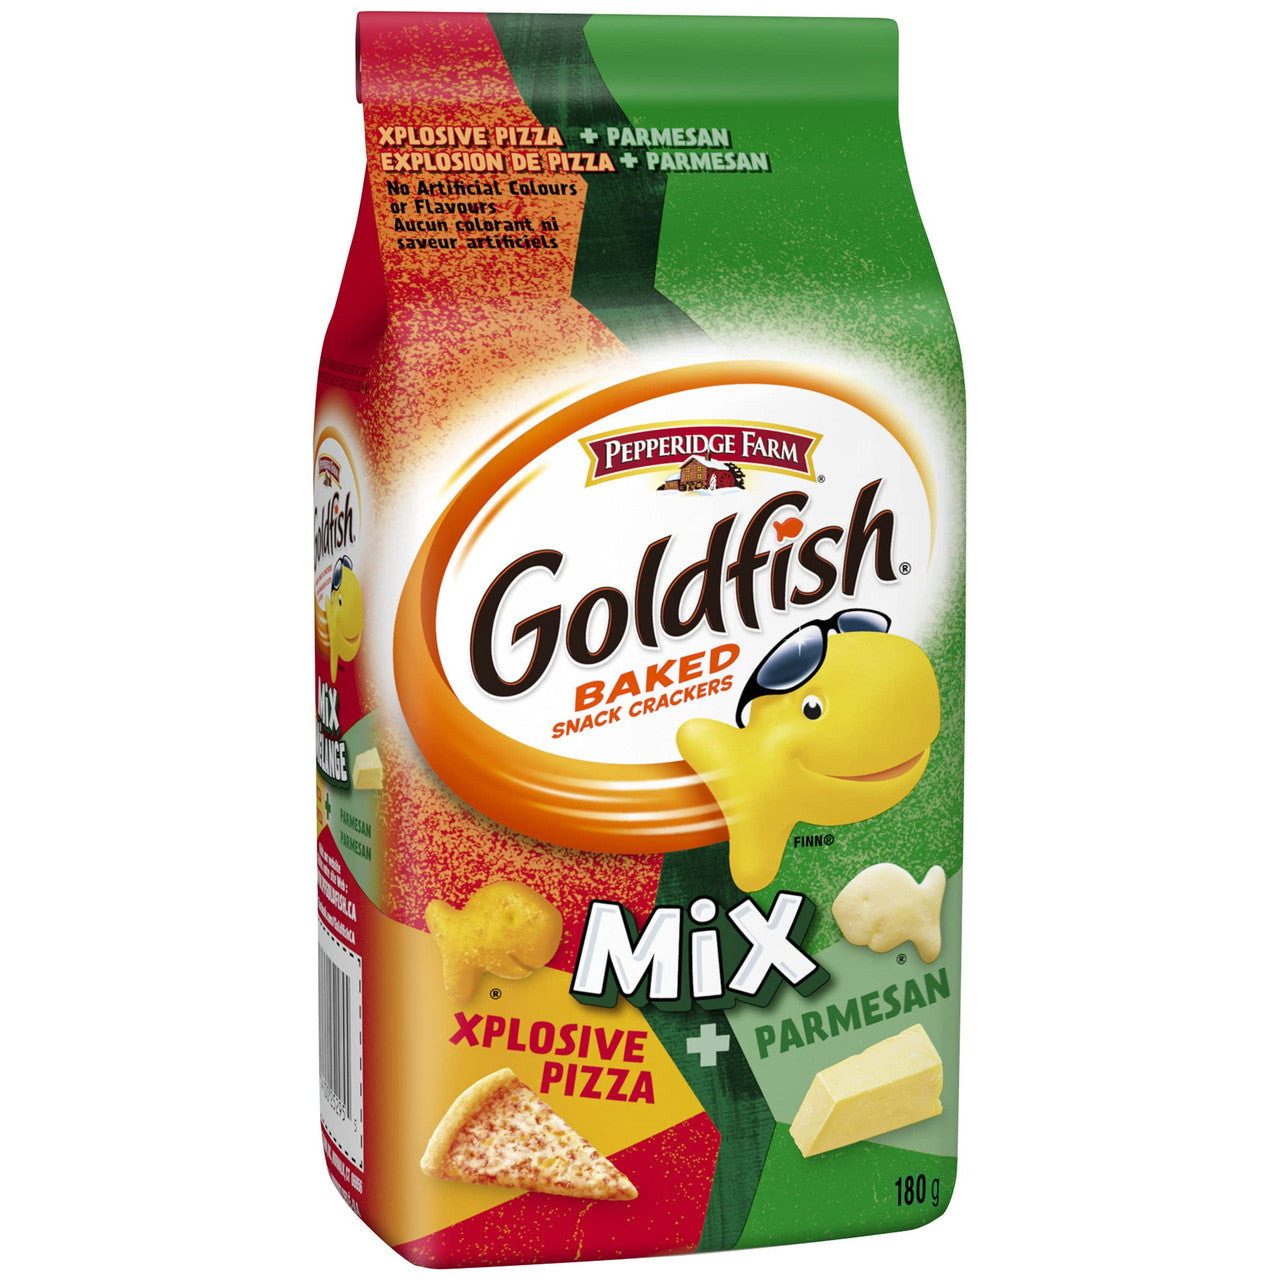 Pepperidge Farm Goldfish Mix Explosive Pizza & Parmesan Crackers, 180g/6.3 oz., {Imported from Canada}